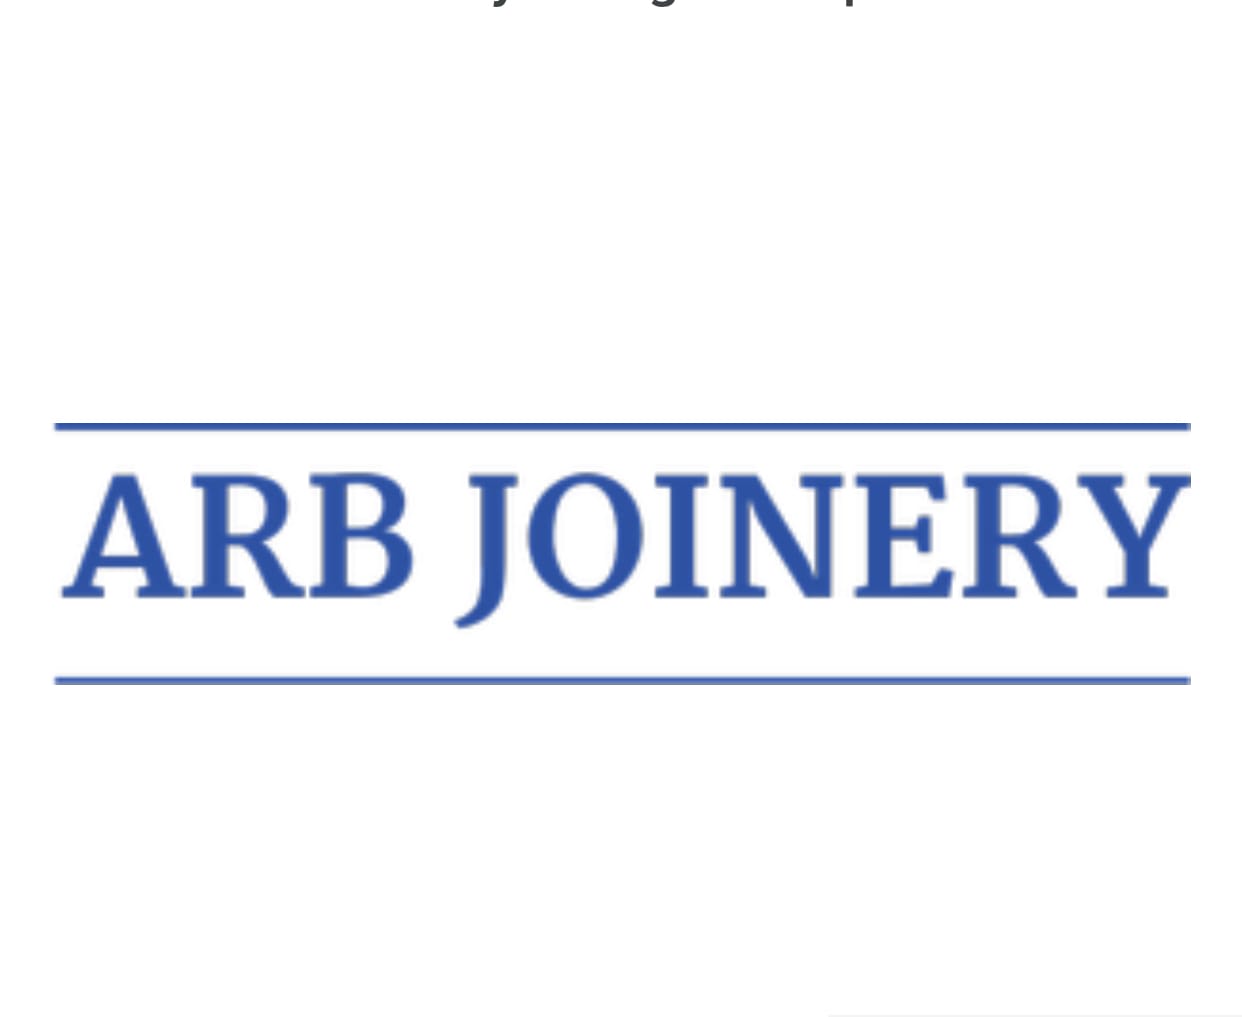 ARB Joinery